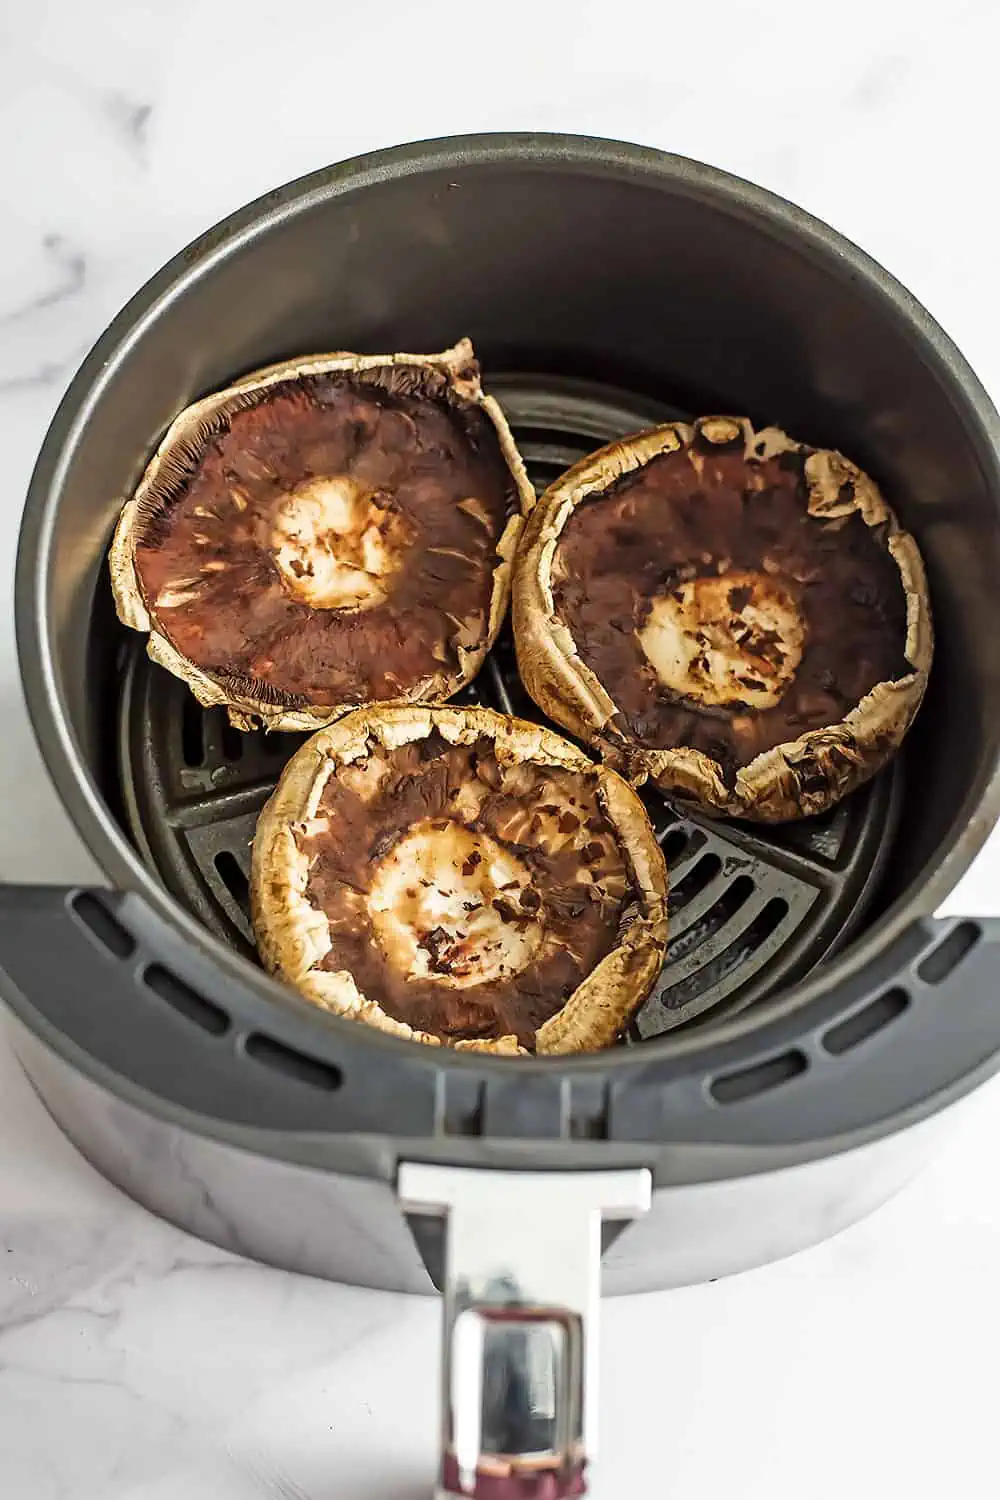 Portobello mushrooms in the air fryer before cooking.